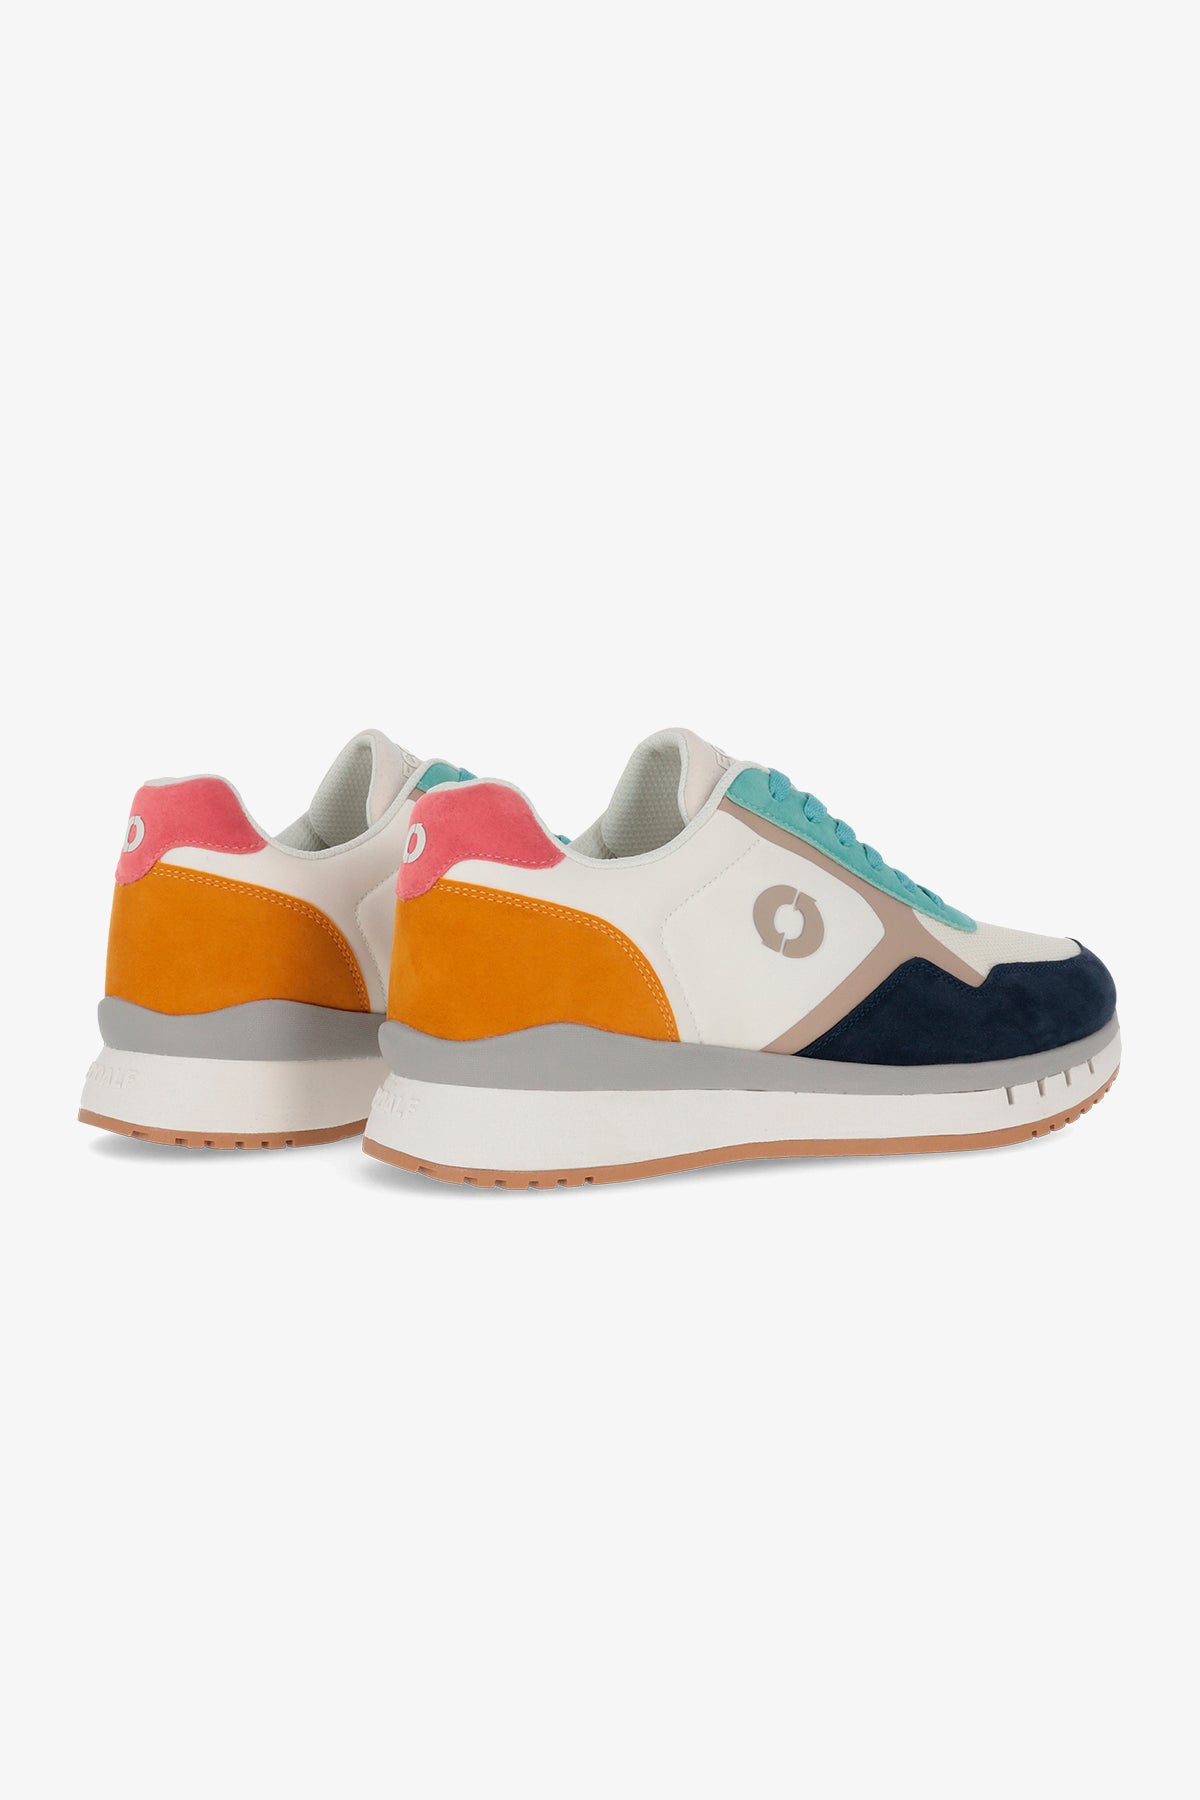 OFF WHITE / NAVY CERVINO TRAINERS